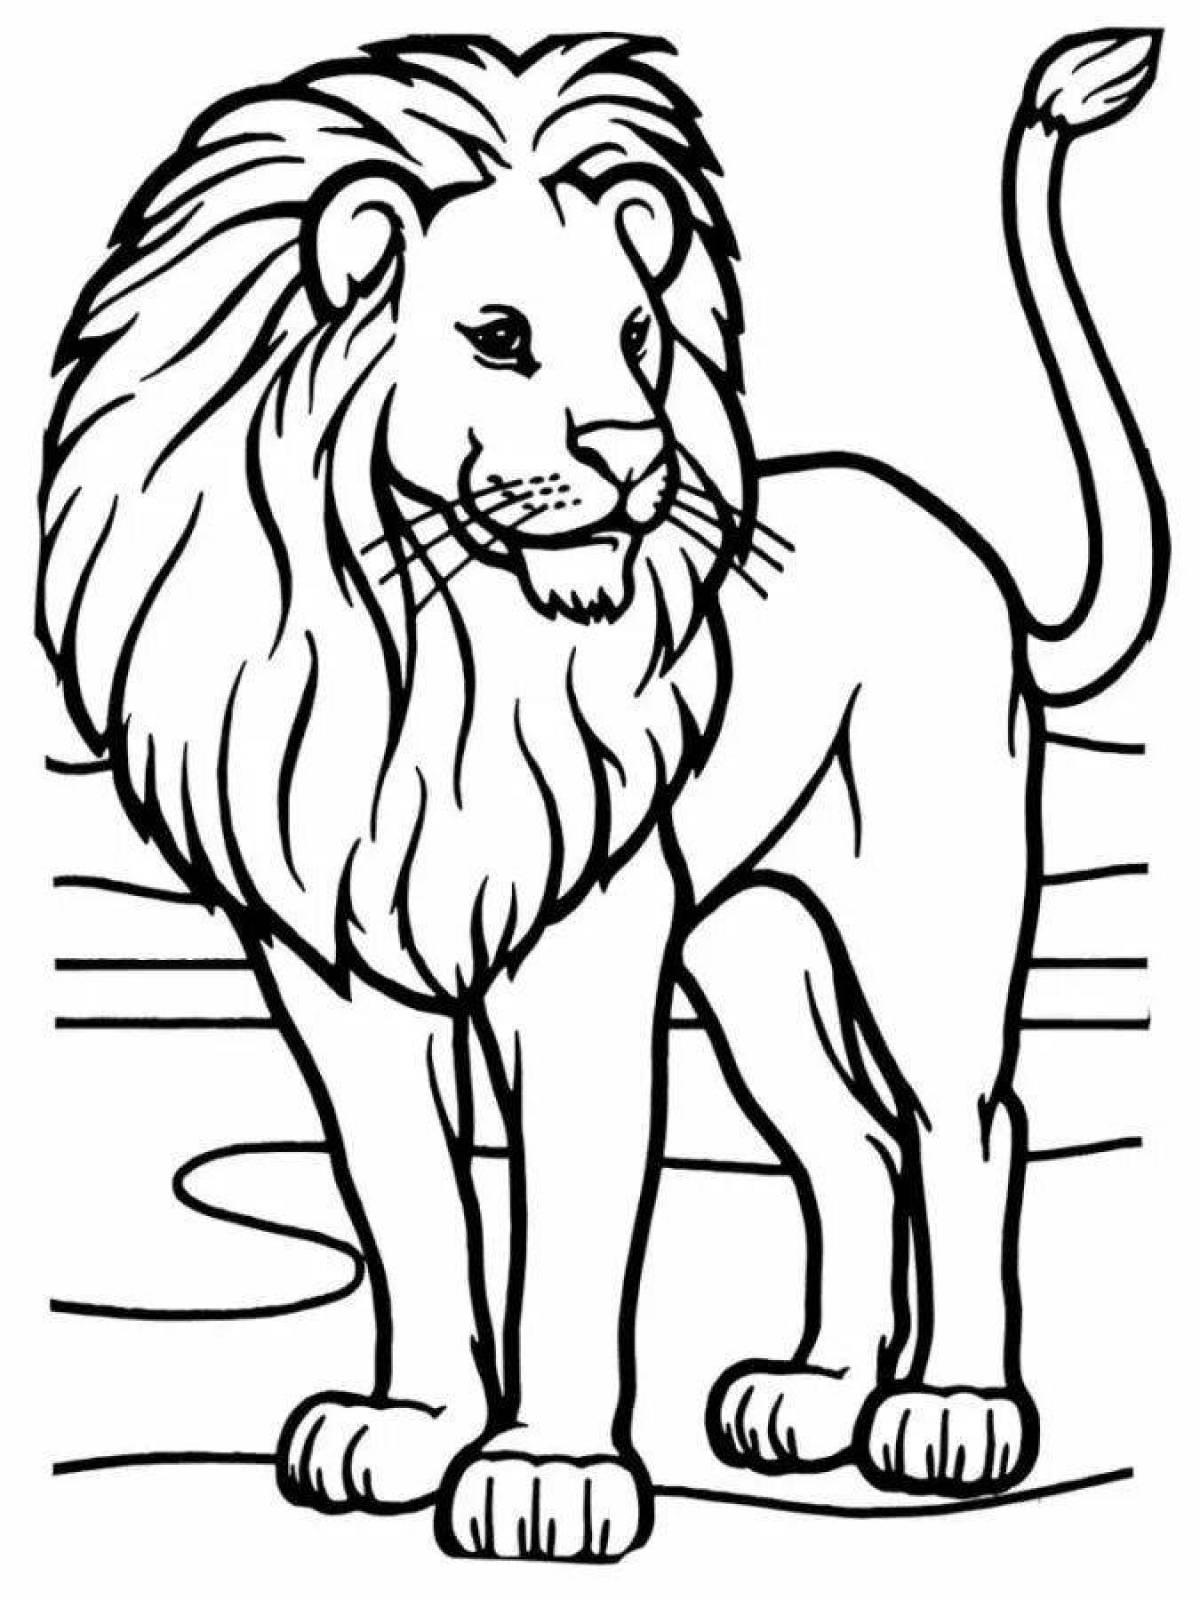 Coloring majestic lion for children